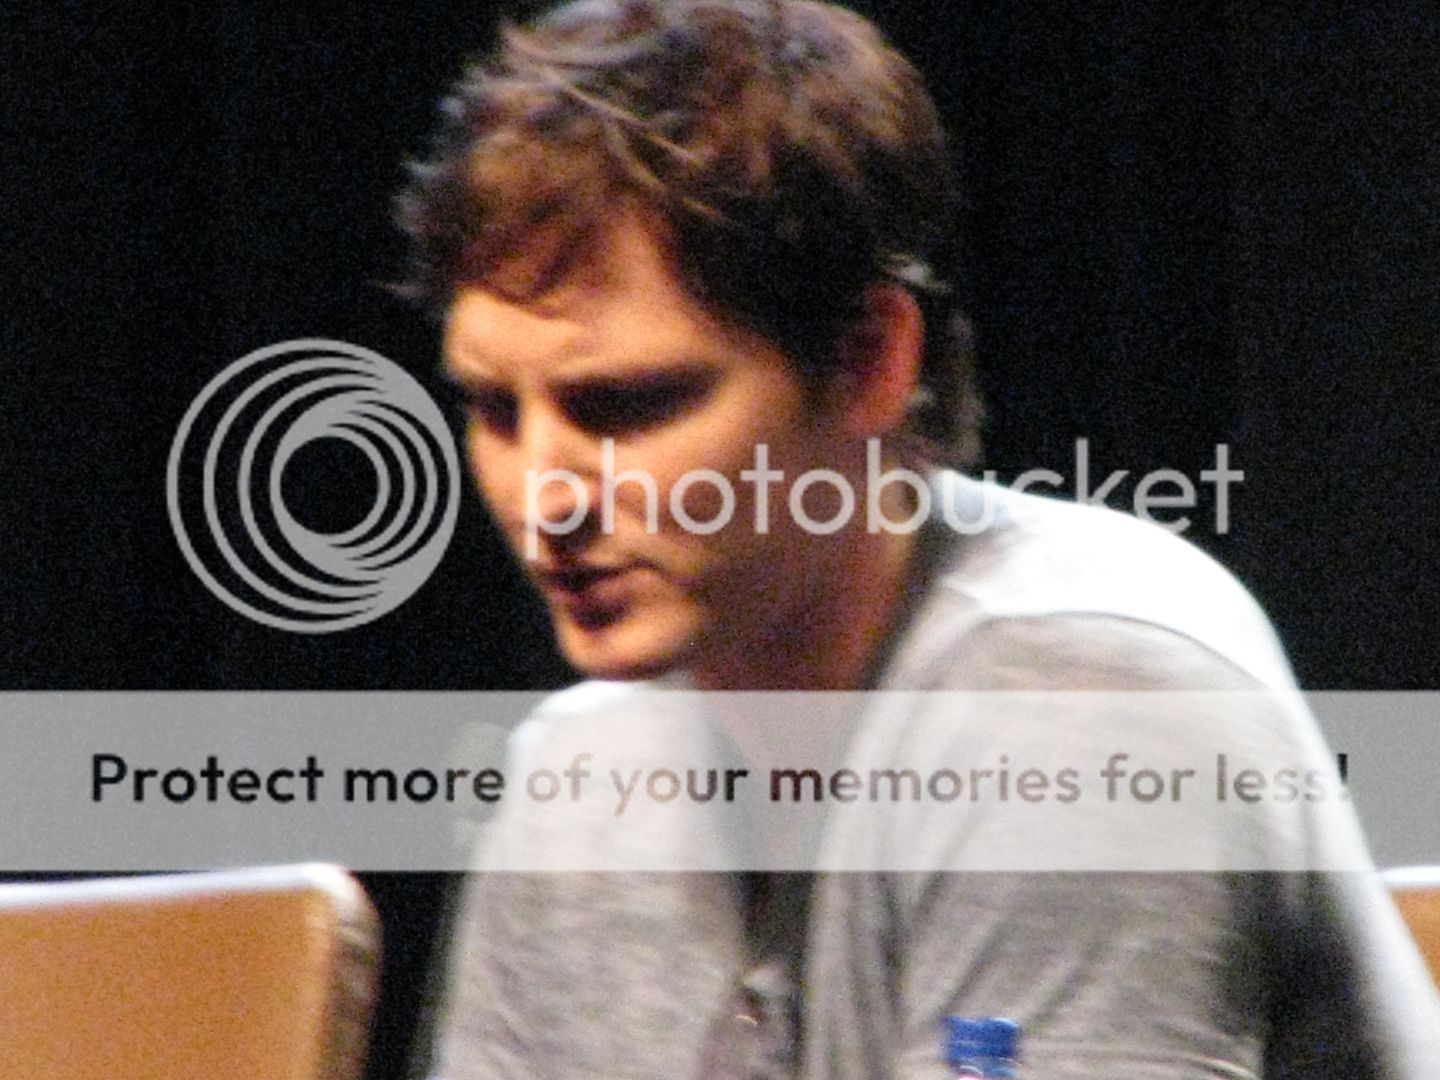 Peter Facinelli discusses his roles on Twilight and Nurse Jackie.